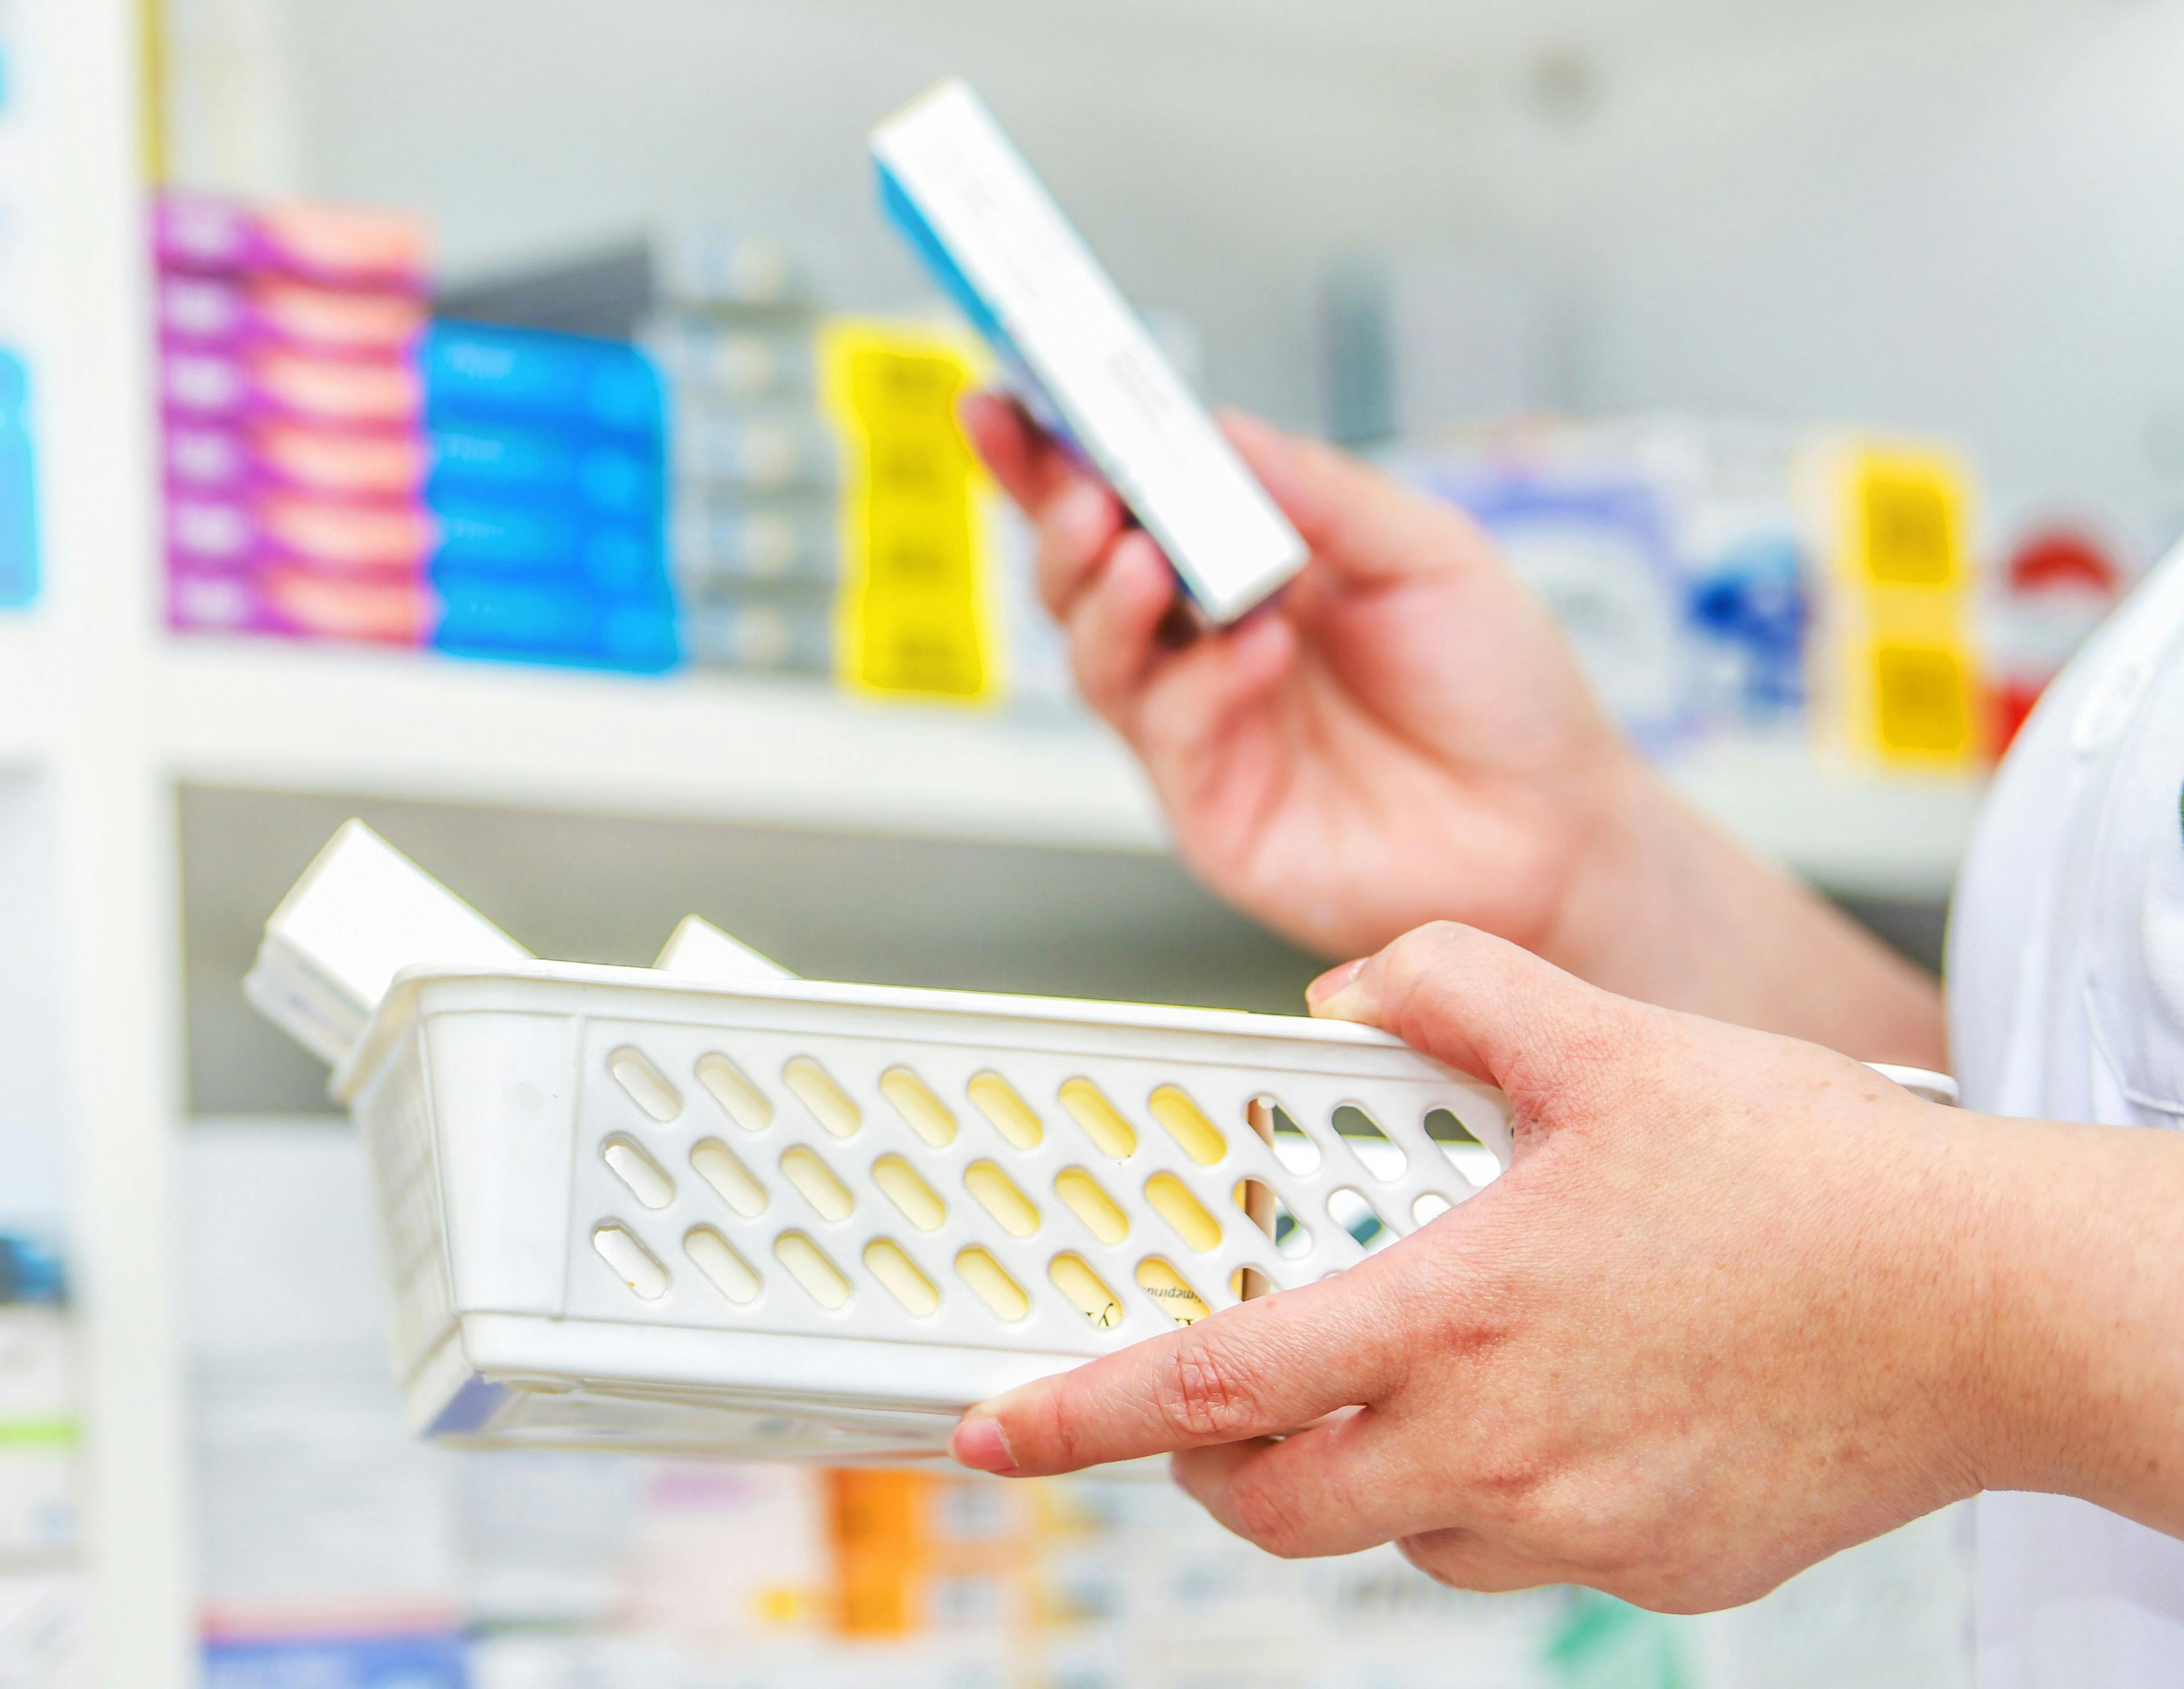 Pharmacy relations 101: Common sources of error and prevention strategies 